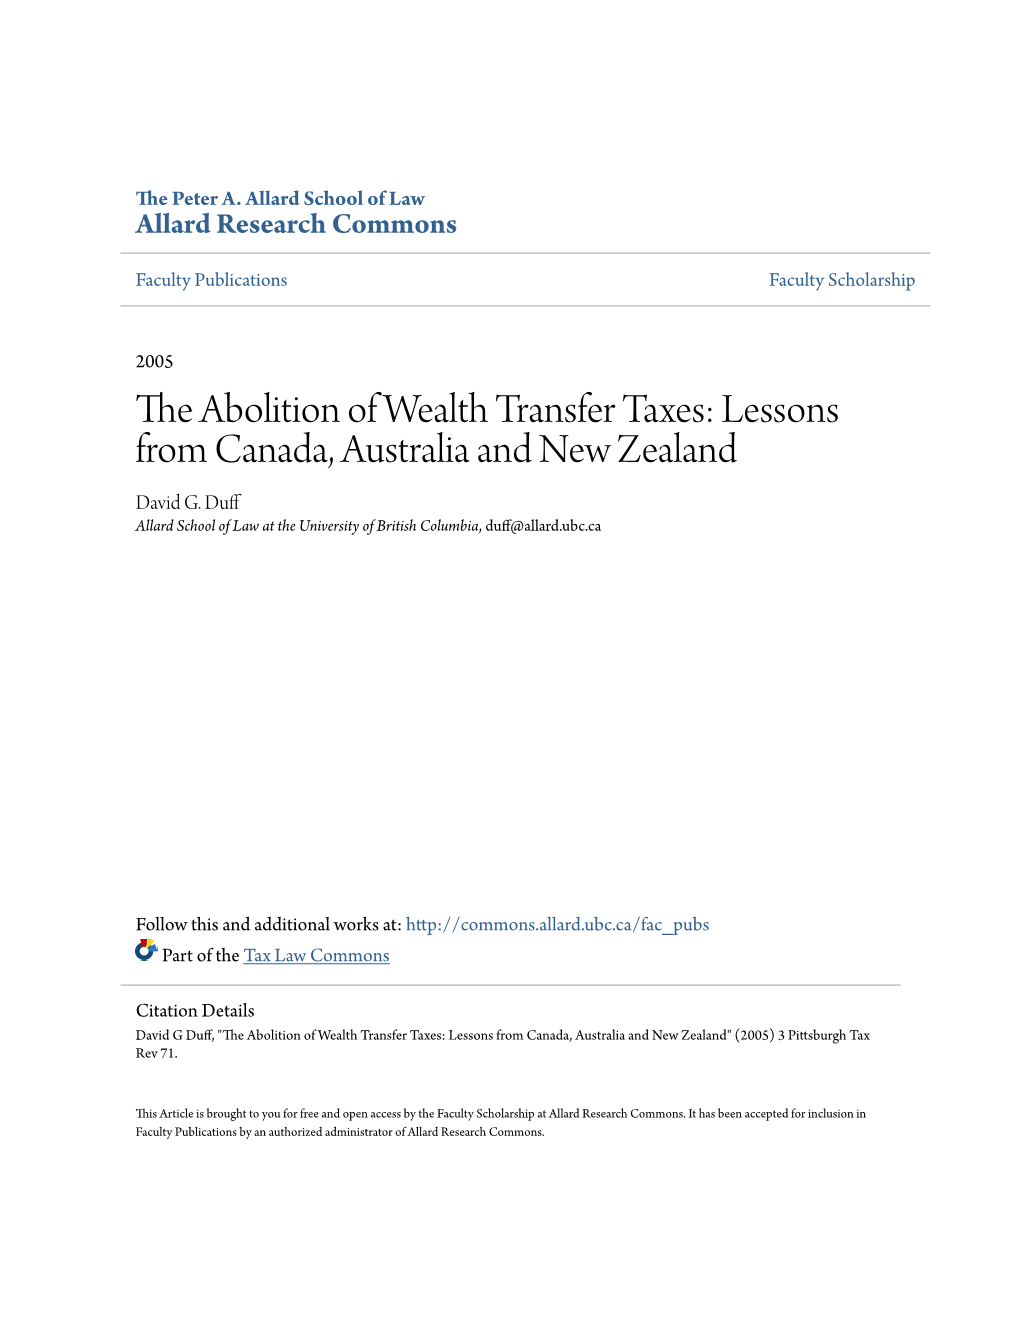 The Abolition of Wealth Transfer Taxes: Lessons from Canada, Australia and New Zealand David G